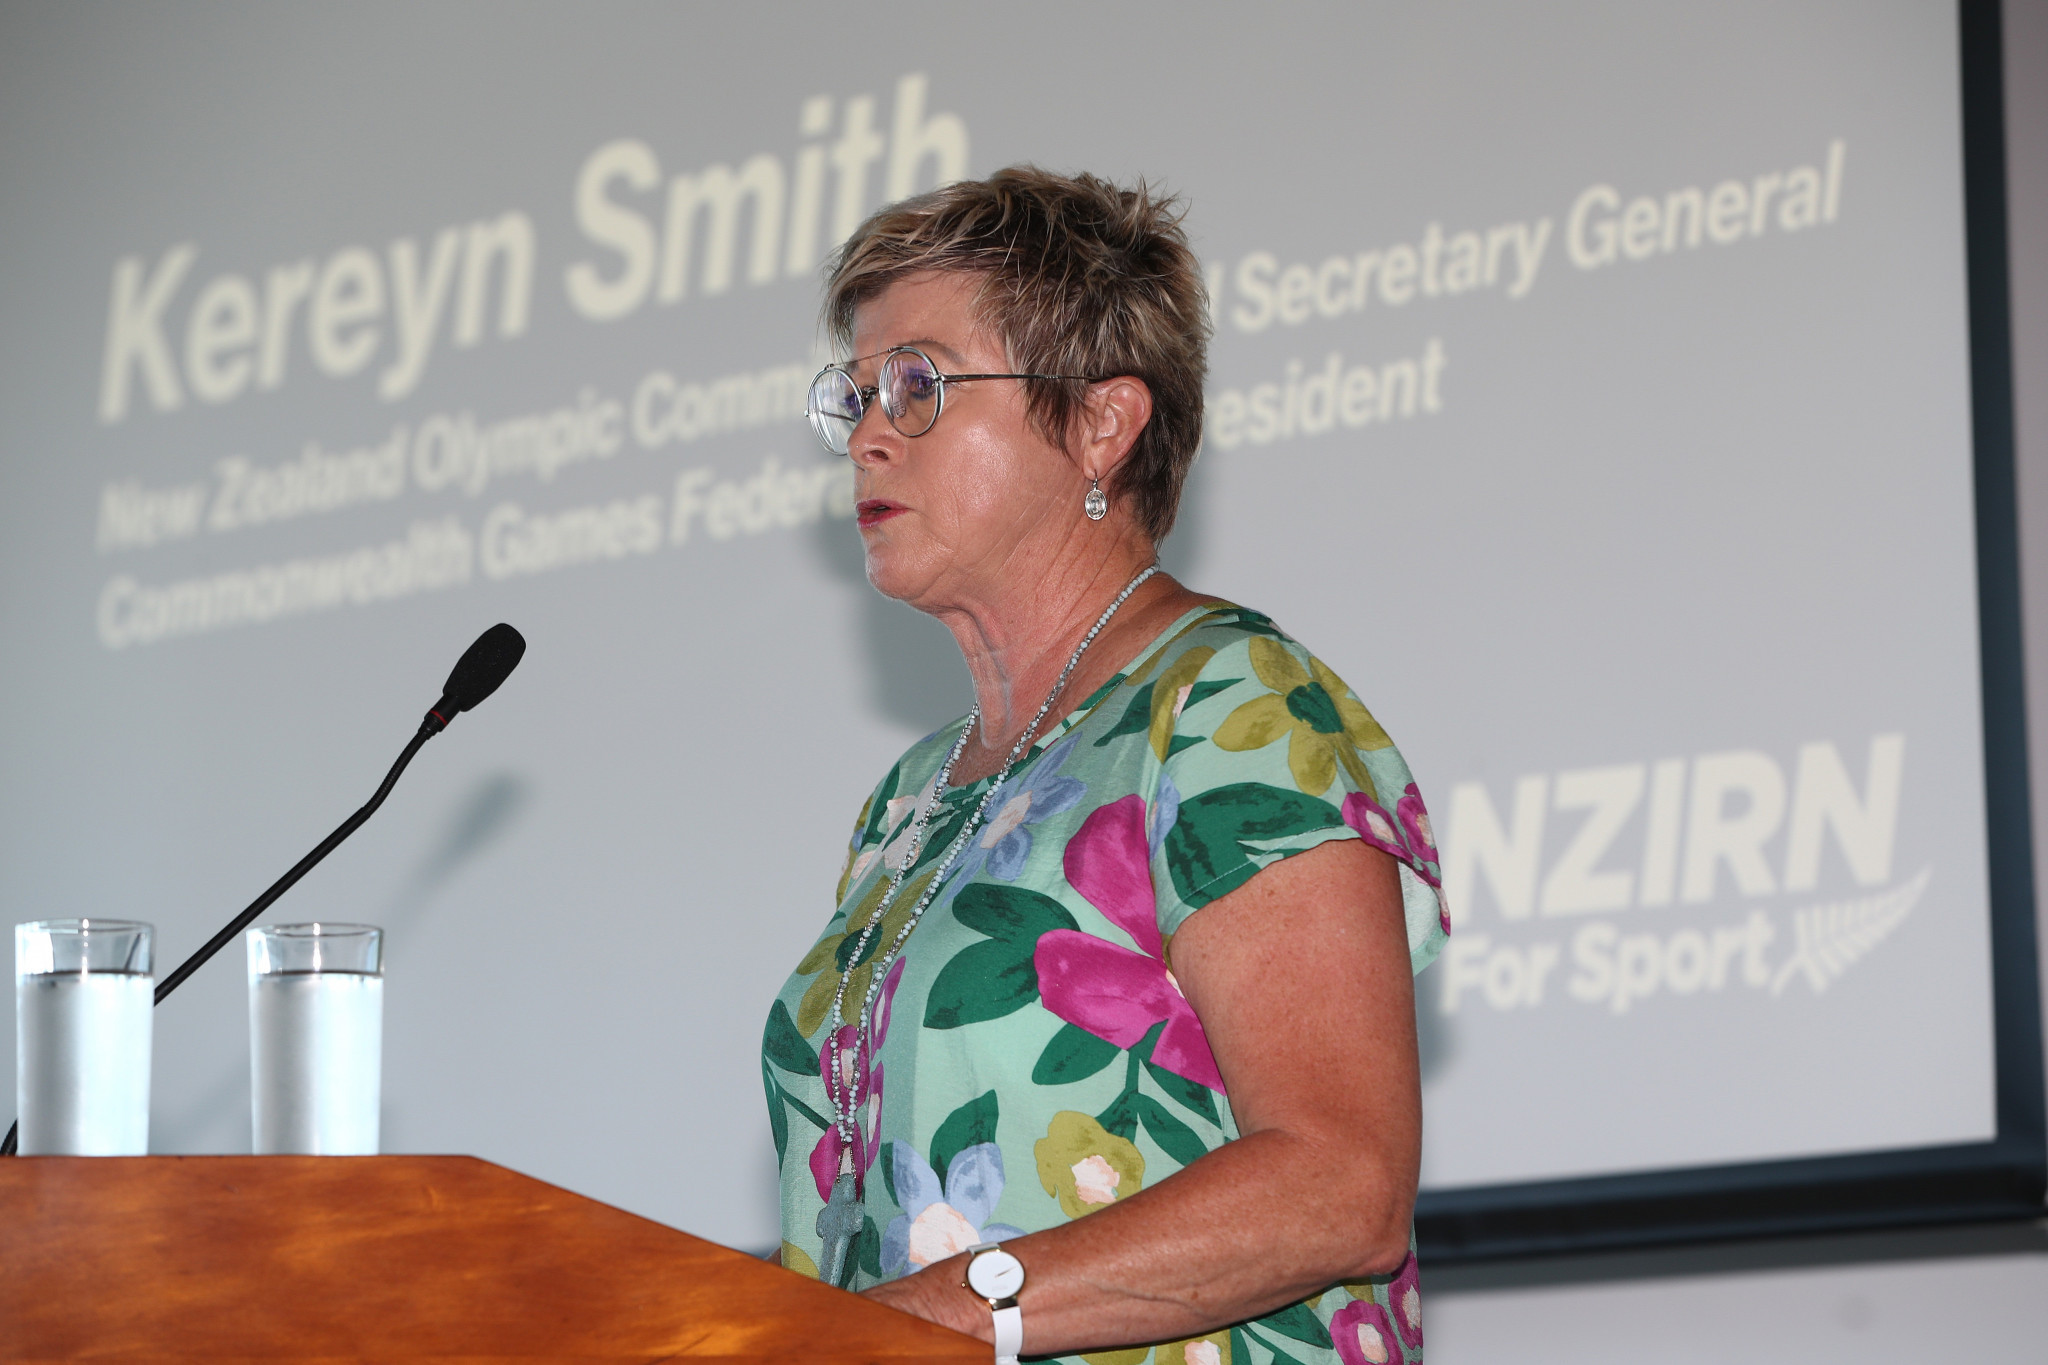 Commonwealth Games Federation vice-president Kereyn Smith believes there needs to be a 